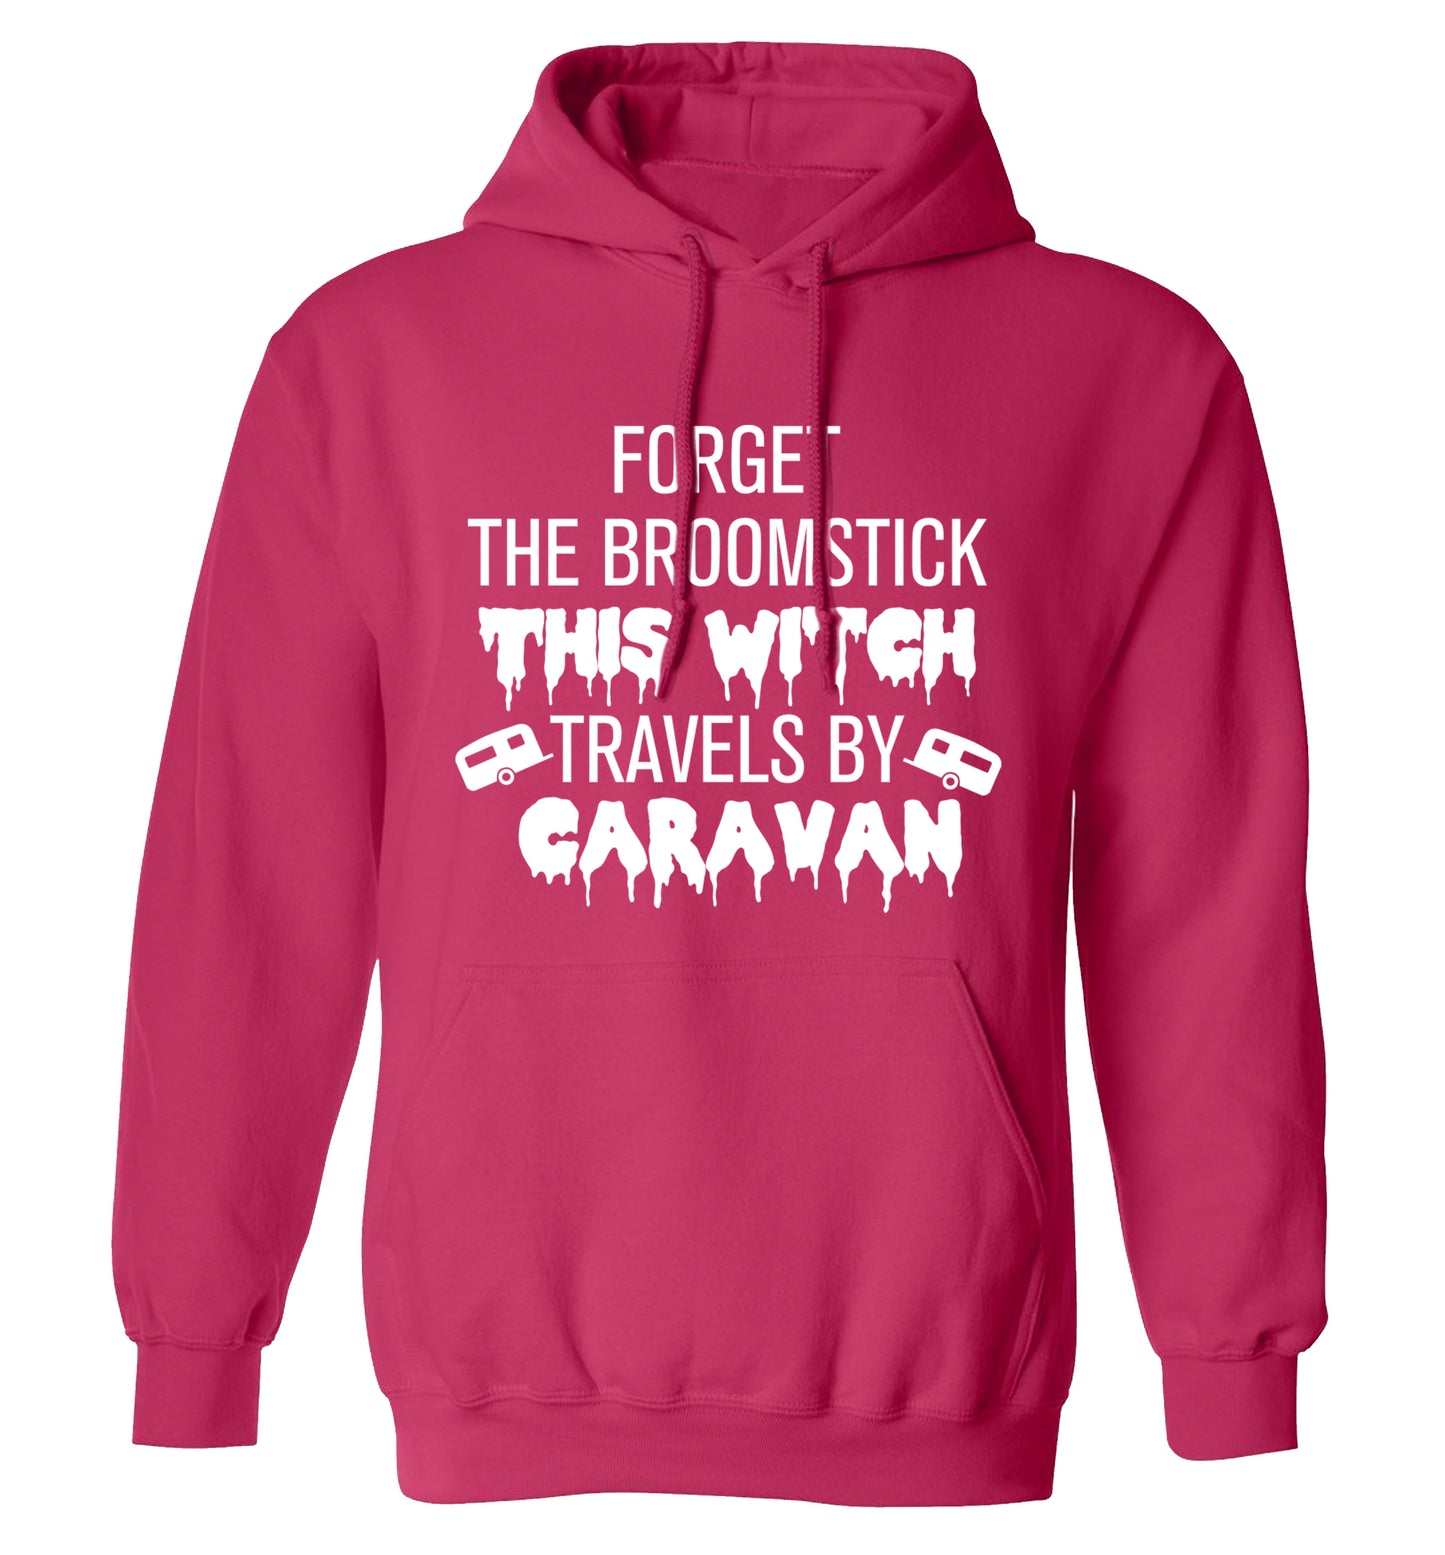 Forget the broomstick this witch travels by caravan adults unisexpink hoodie 2XL